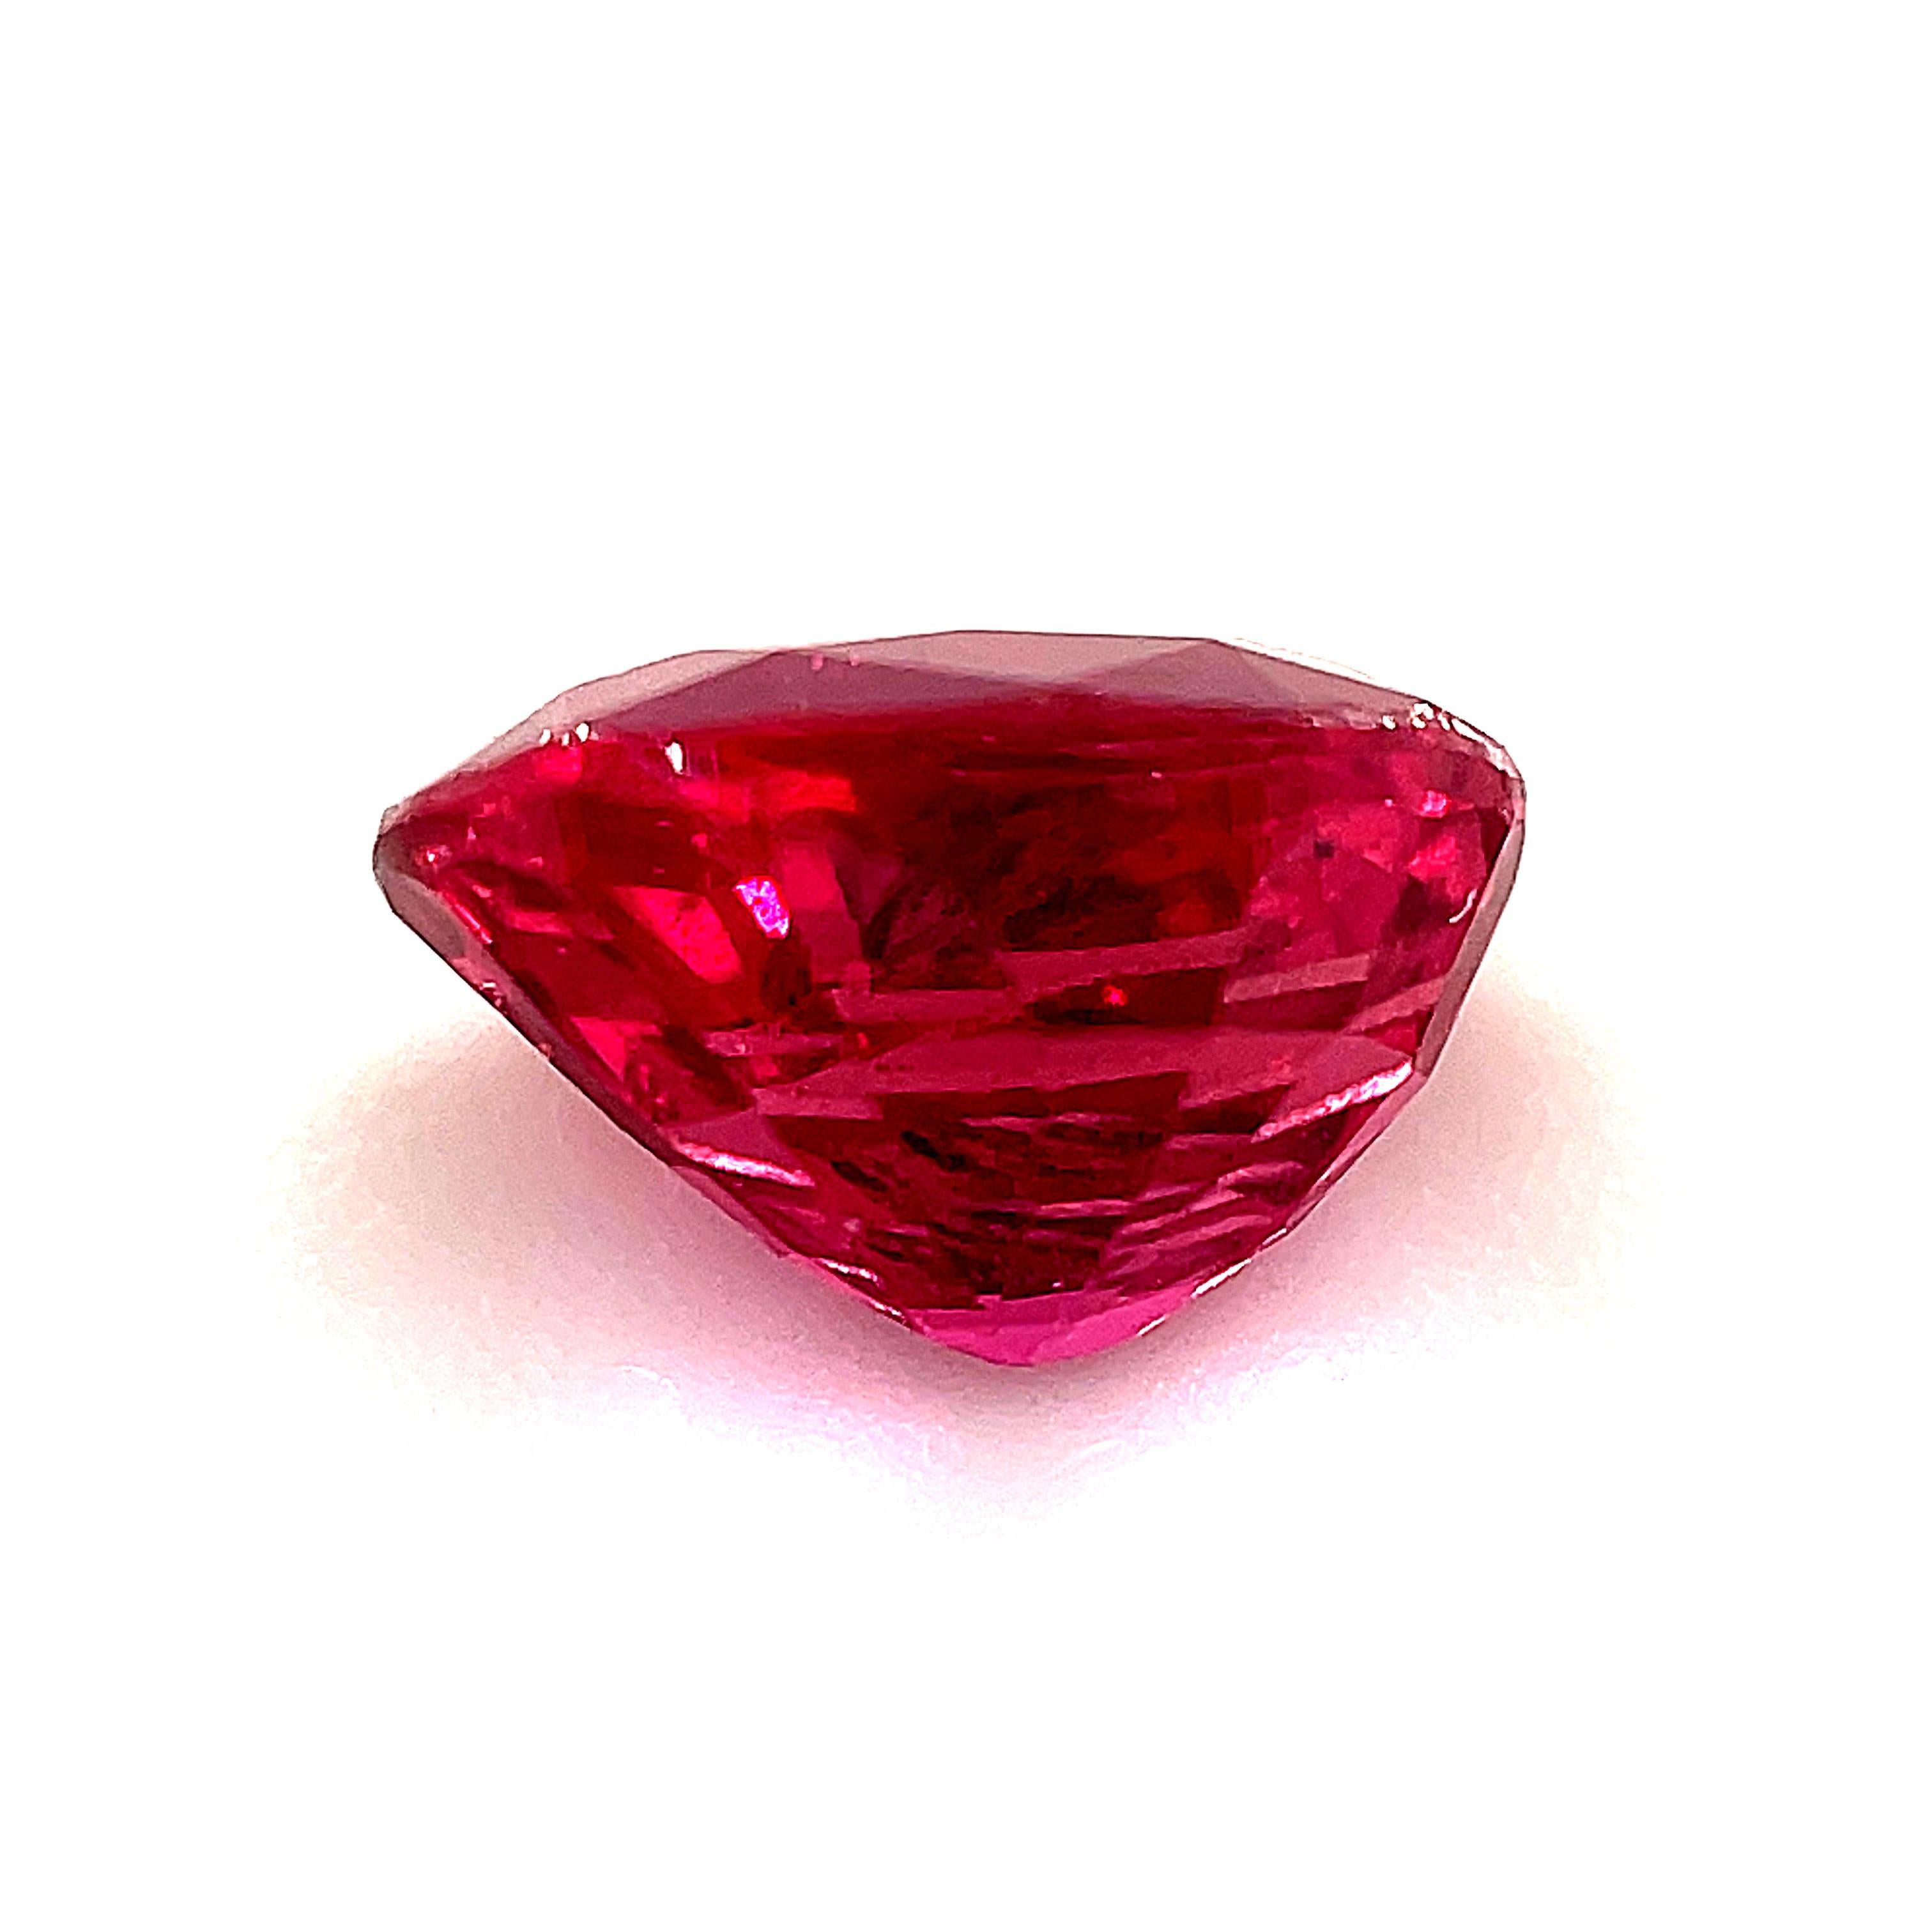 This gorgeous 1.07 carat oval ruby has bright, pure red color and sparkles with rich pink highlights! It measures 6.64 x 4.47mm, is eye clean, and has a lovely, slender shape that will lend itself beautifully to a classic 3-stone ring design. The